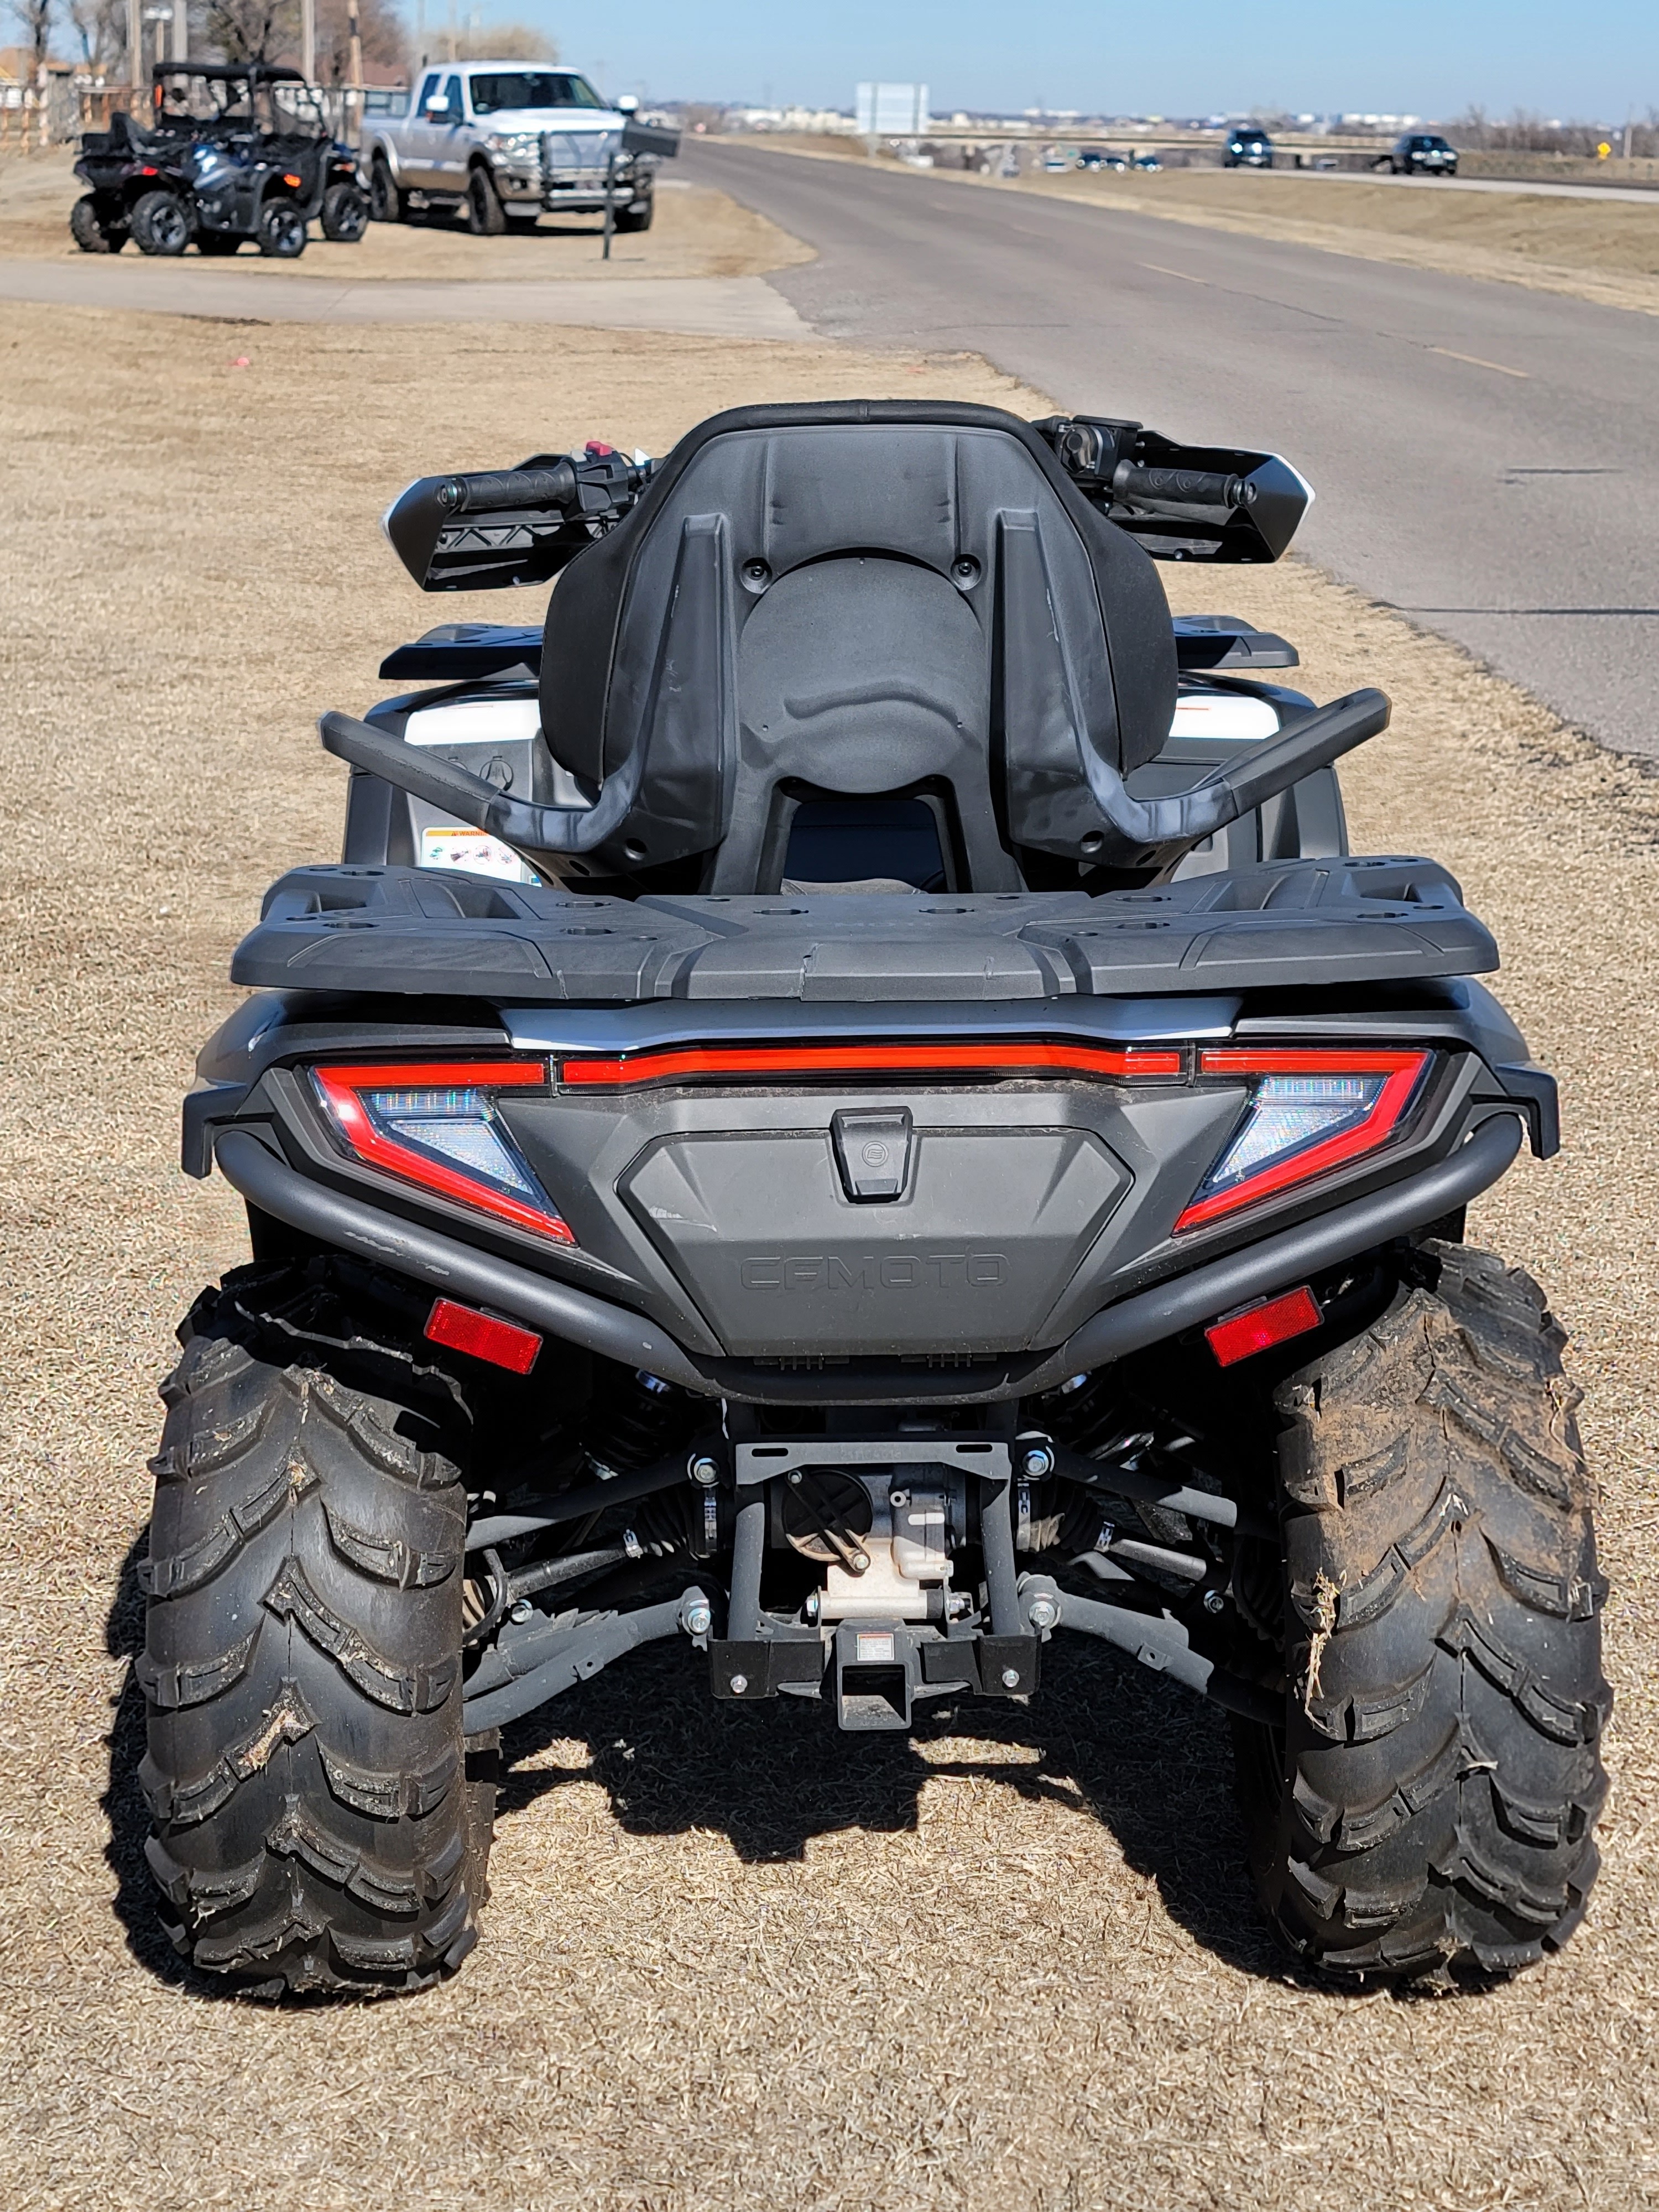 2022 CFMOTO CFORCE 600 Touring at Xtreme Outdoor Equipment